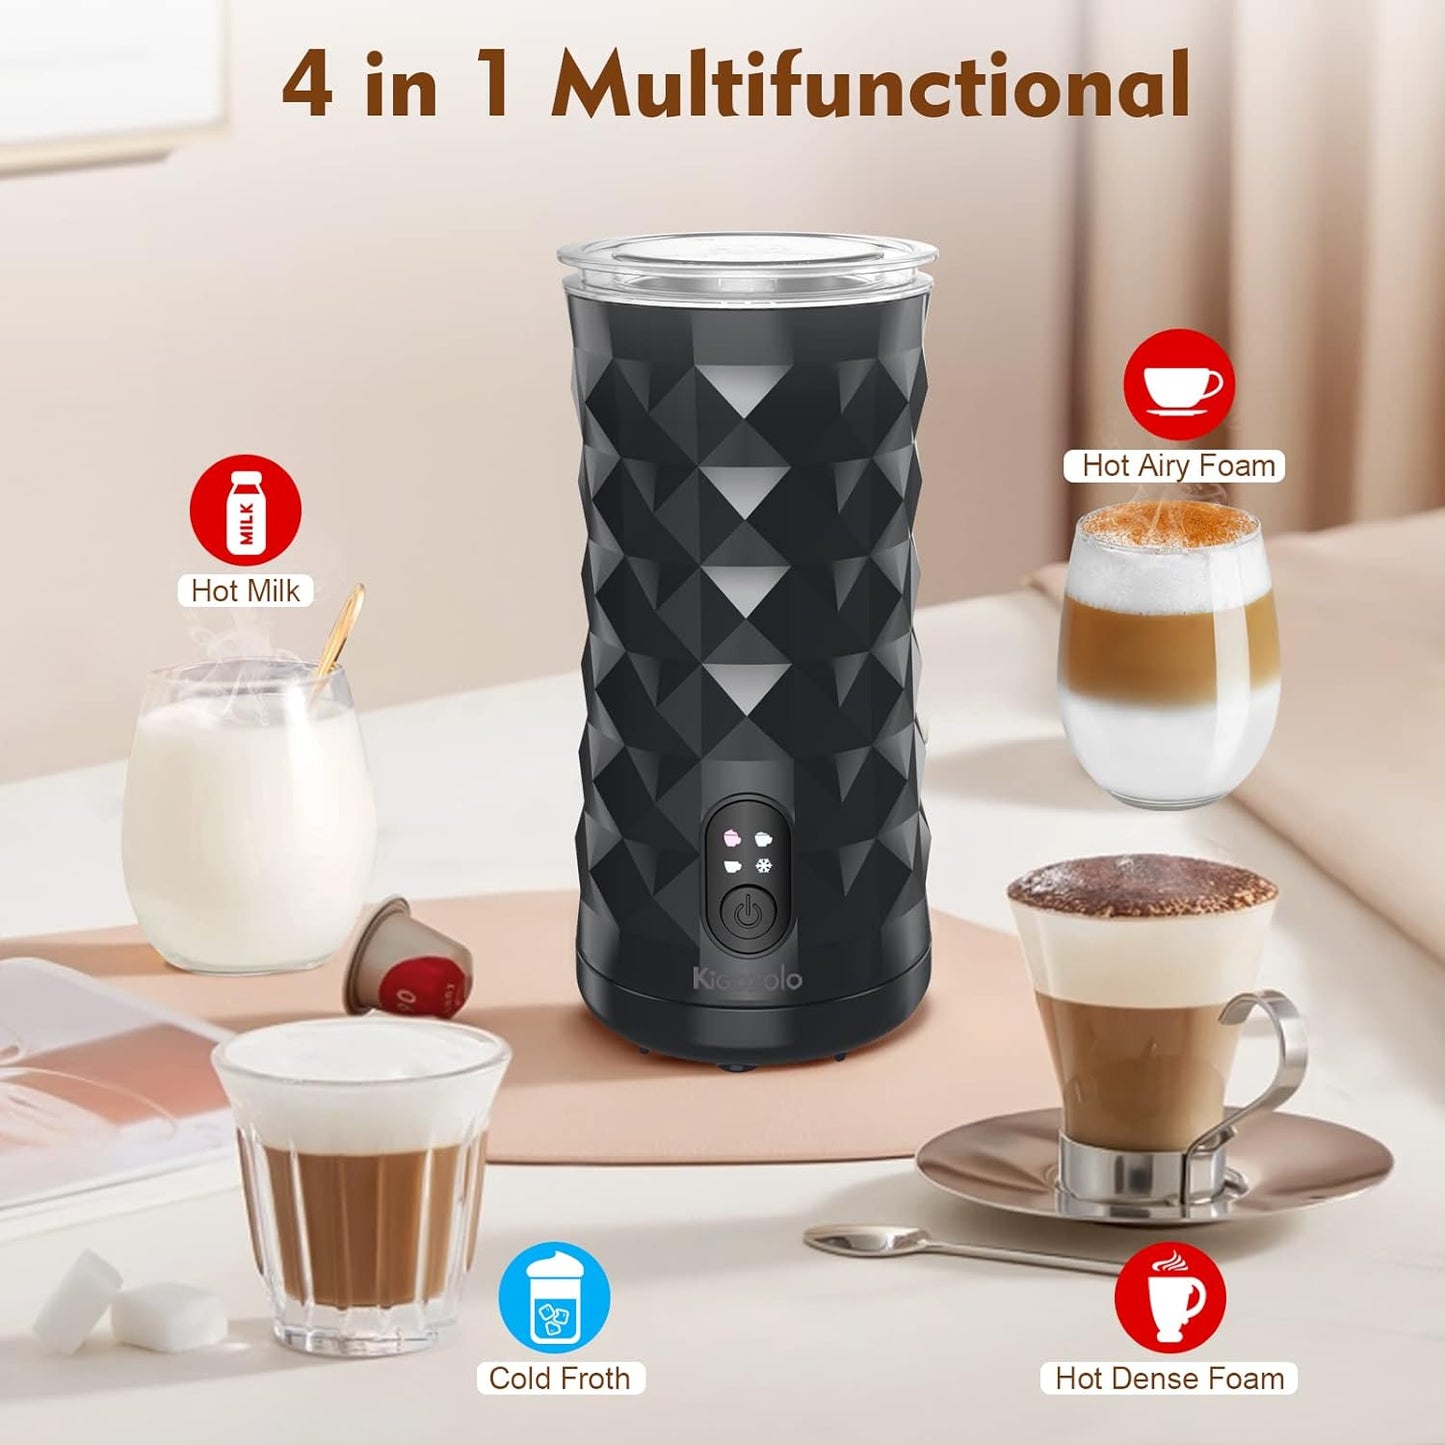 KIGOZOLO Milk Frother,4-in-1 Electric Milk Frother and Steamer, Non-Slip Stylish Design, Hot & Cold Milk Steamer with Temperature Control, Auto Shut-Off,Good for Coffee Lovers